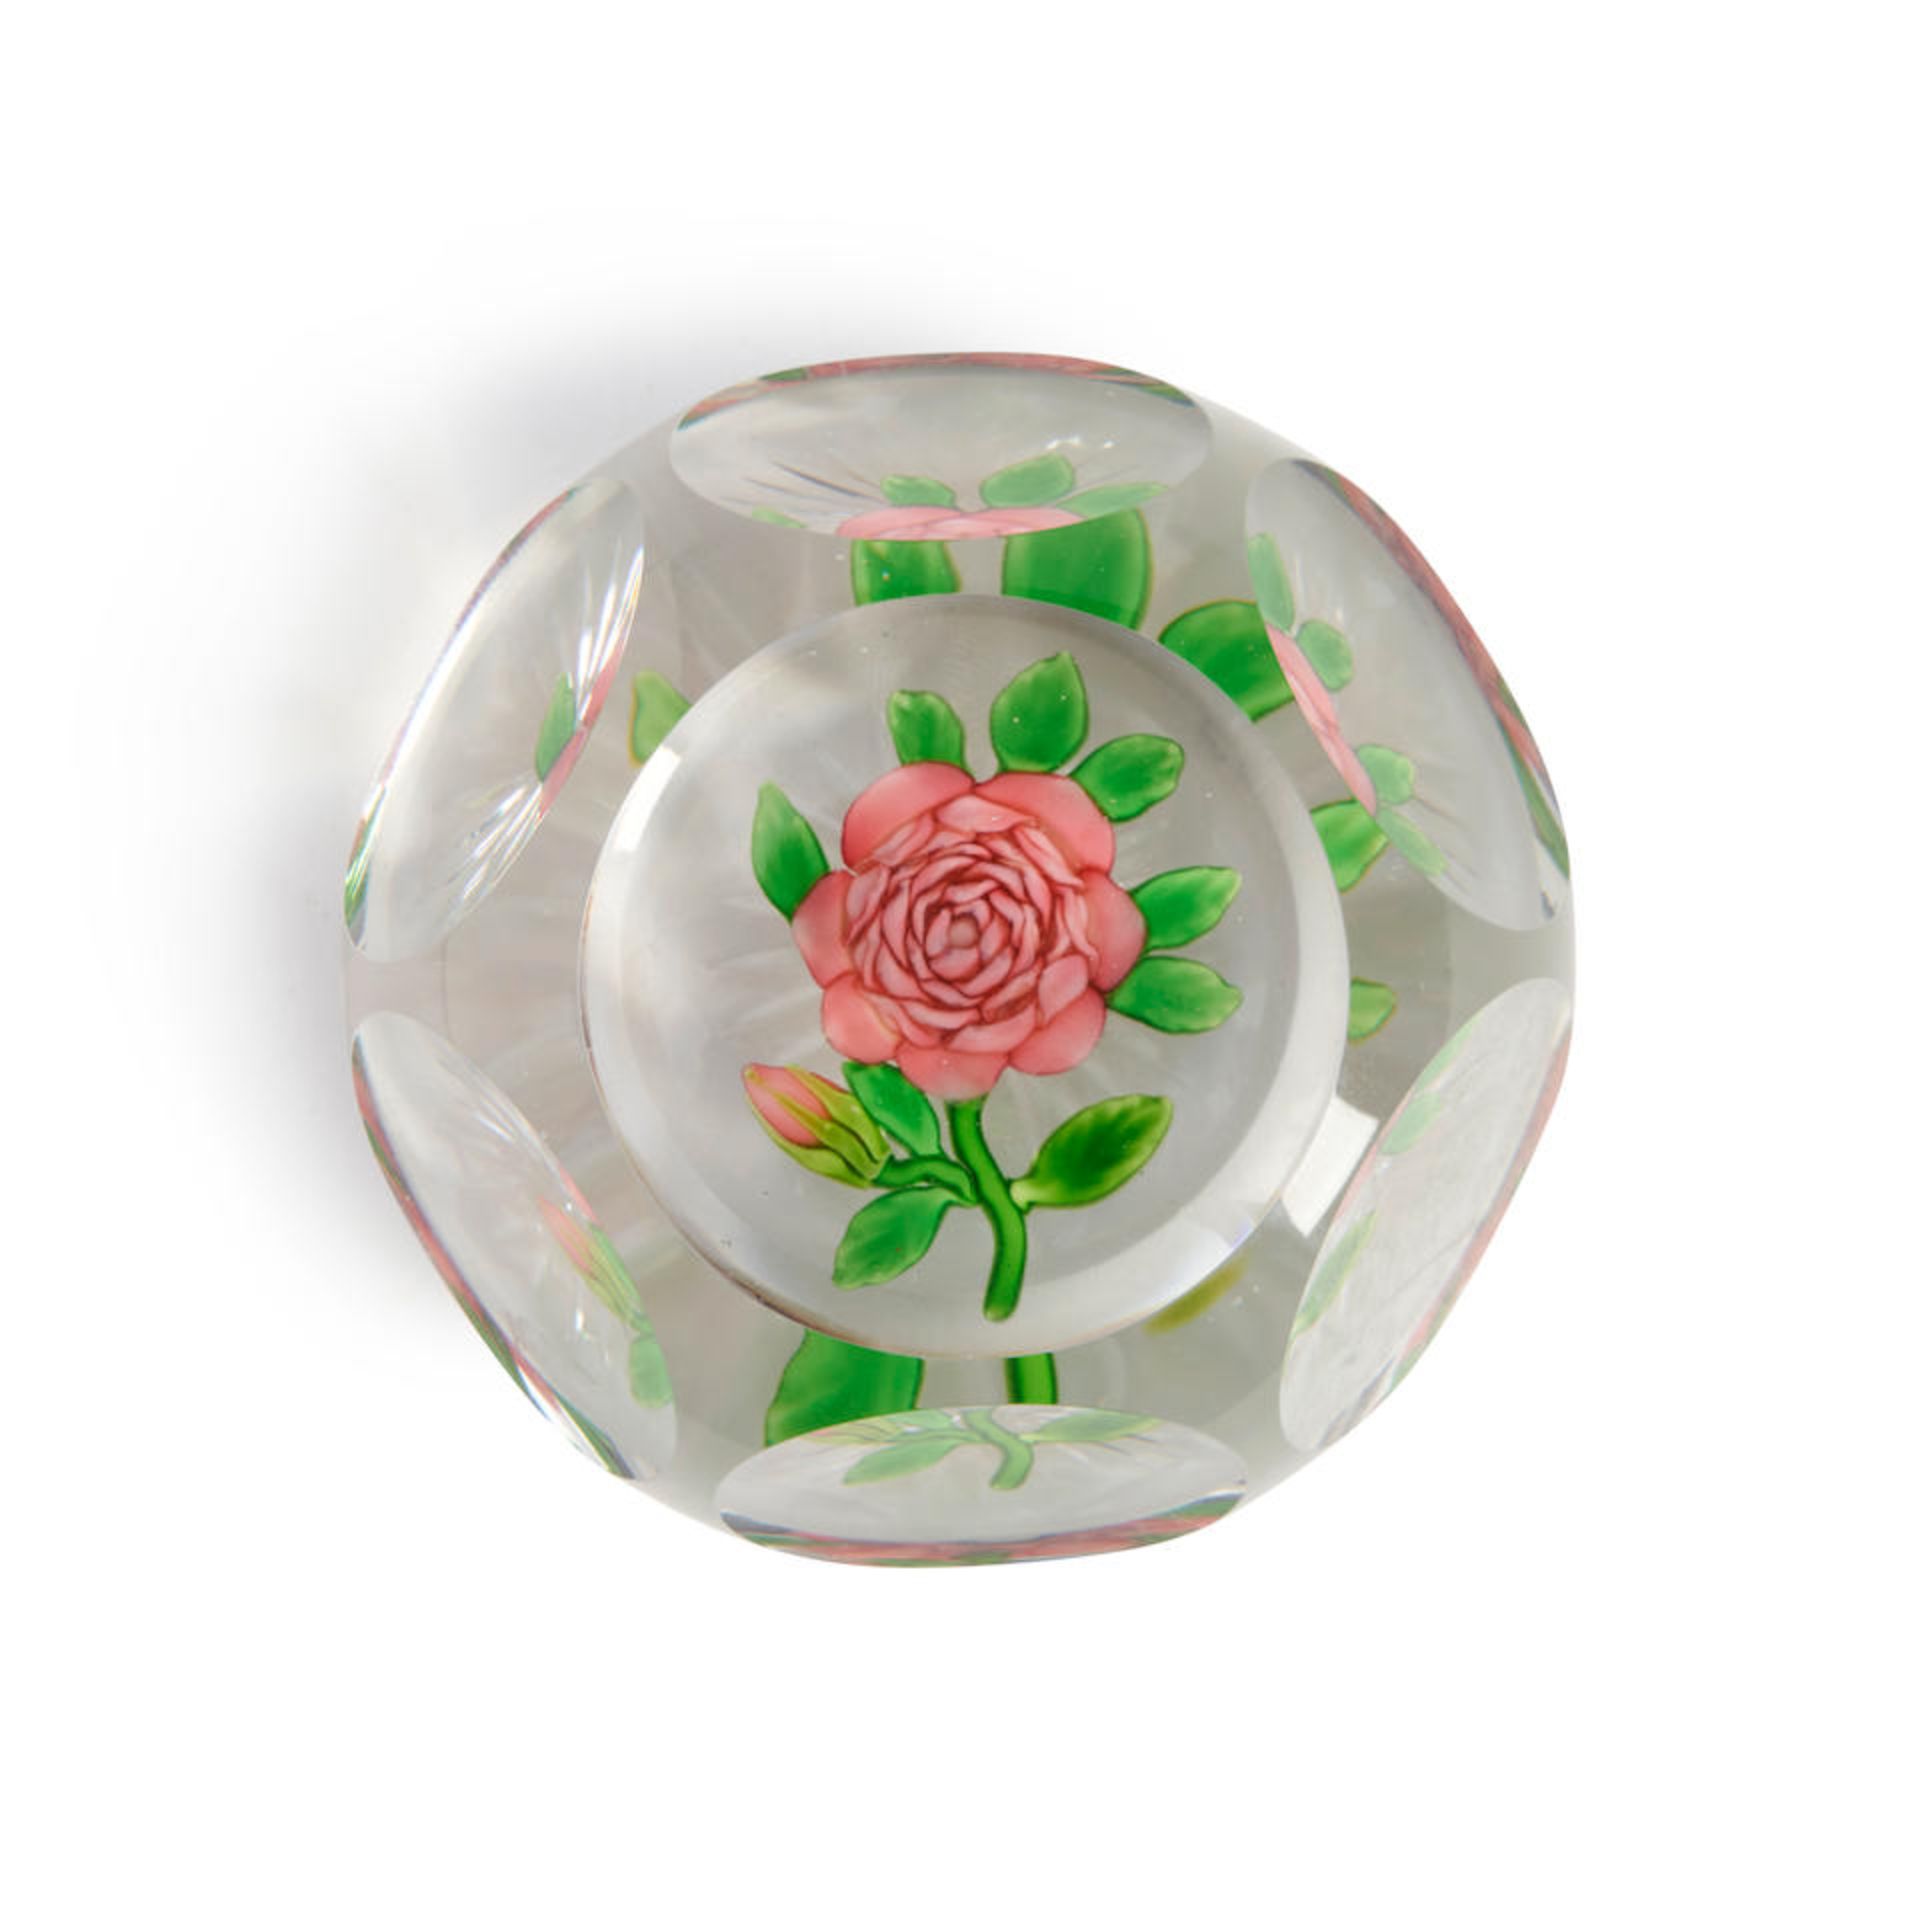 BACCARAT FACETED THOUSAND-PETALLED ROSE GLASS PAPERWEIGHT, France, mid-19th century, ht. 1 3/4, ...